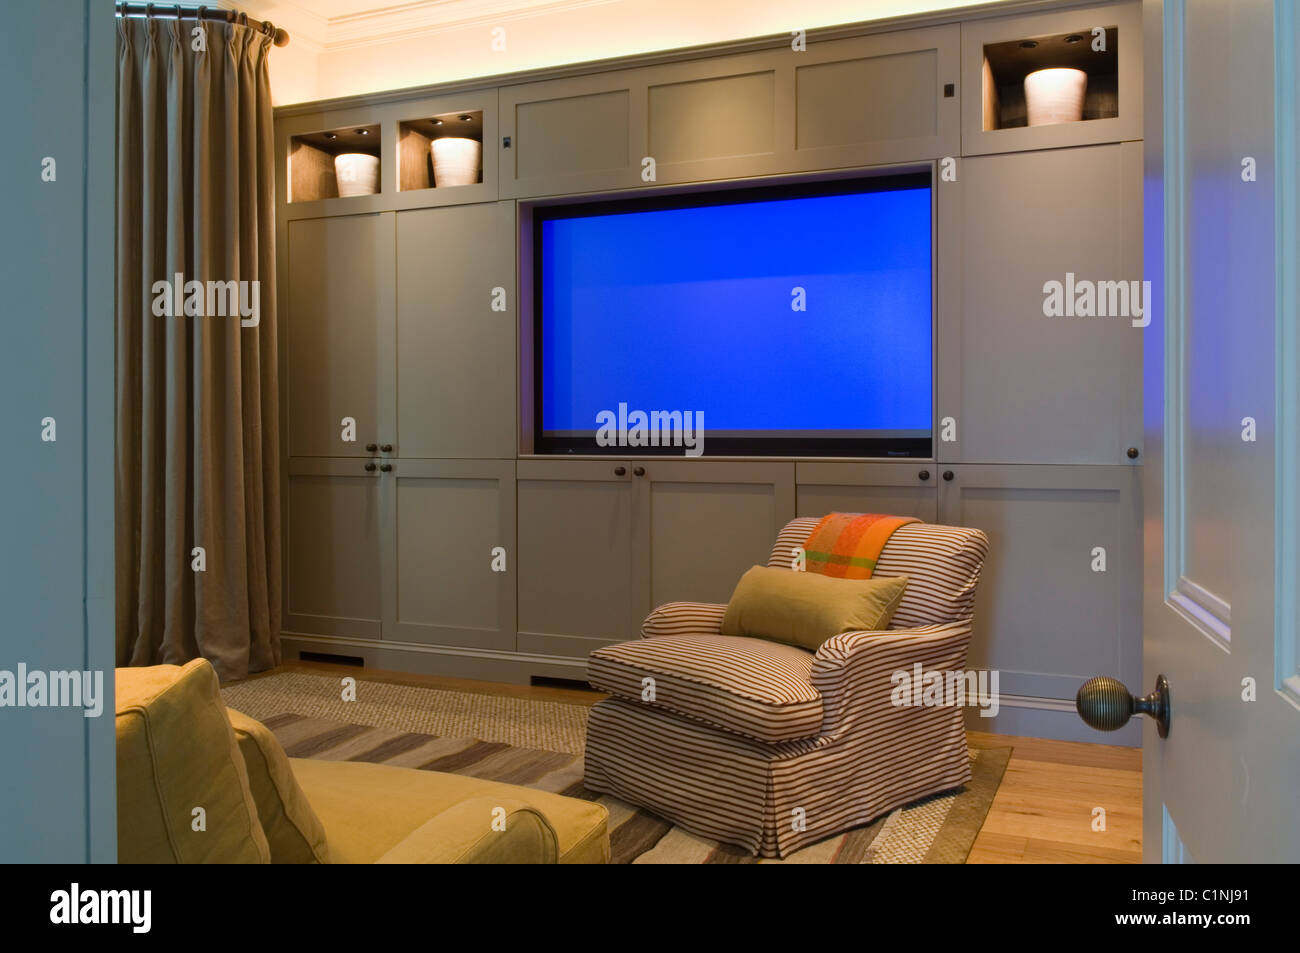 Flat screen home cinema in living room with armchair Stock Photo